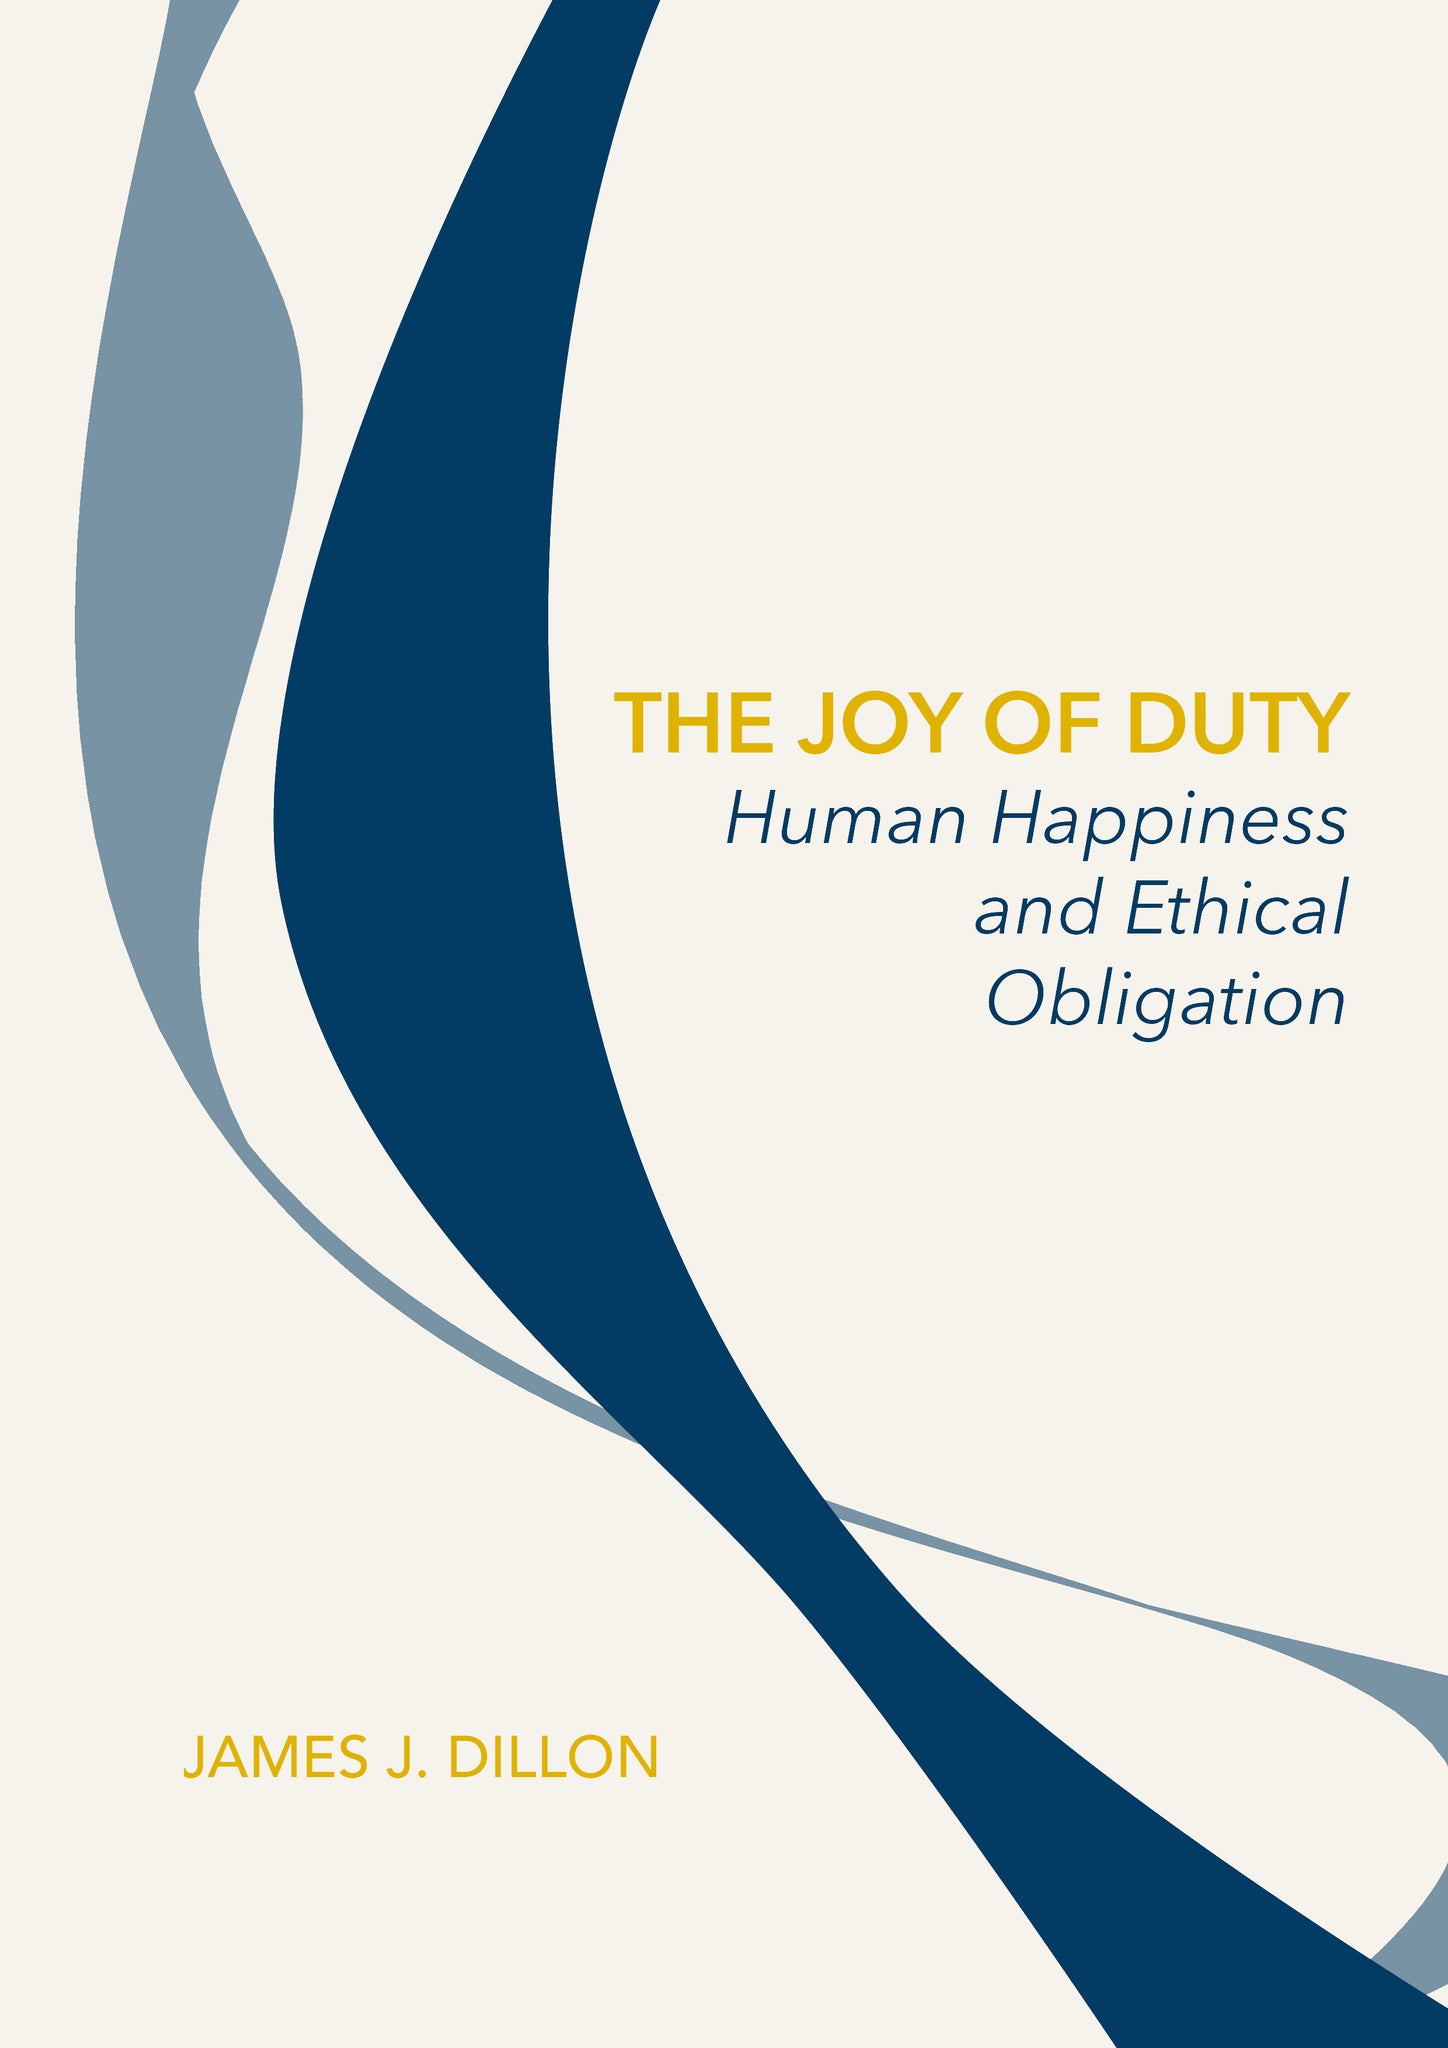 The Joy of Duty: Human Happiness and Ethical Obligation